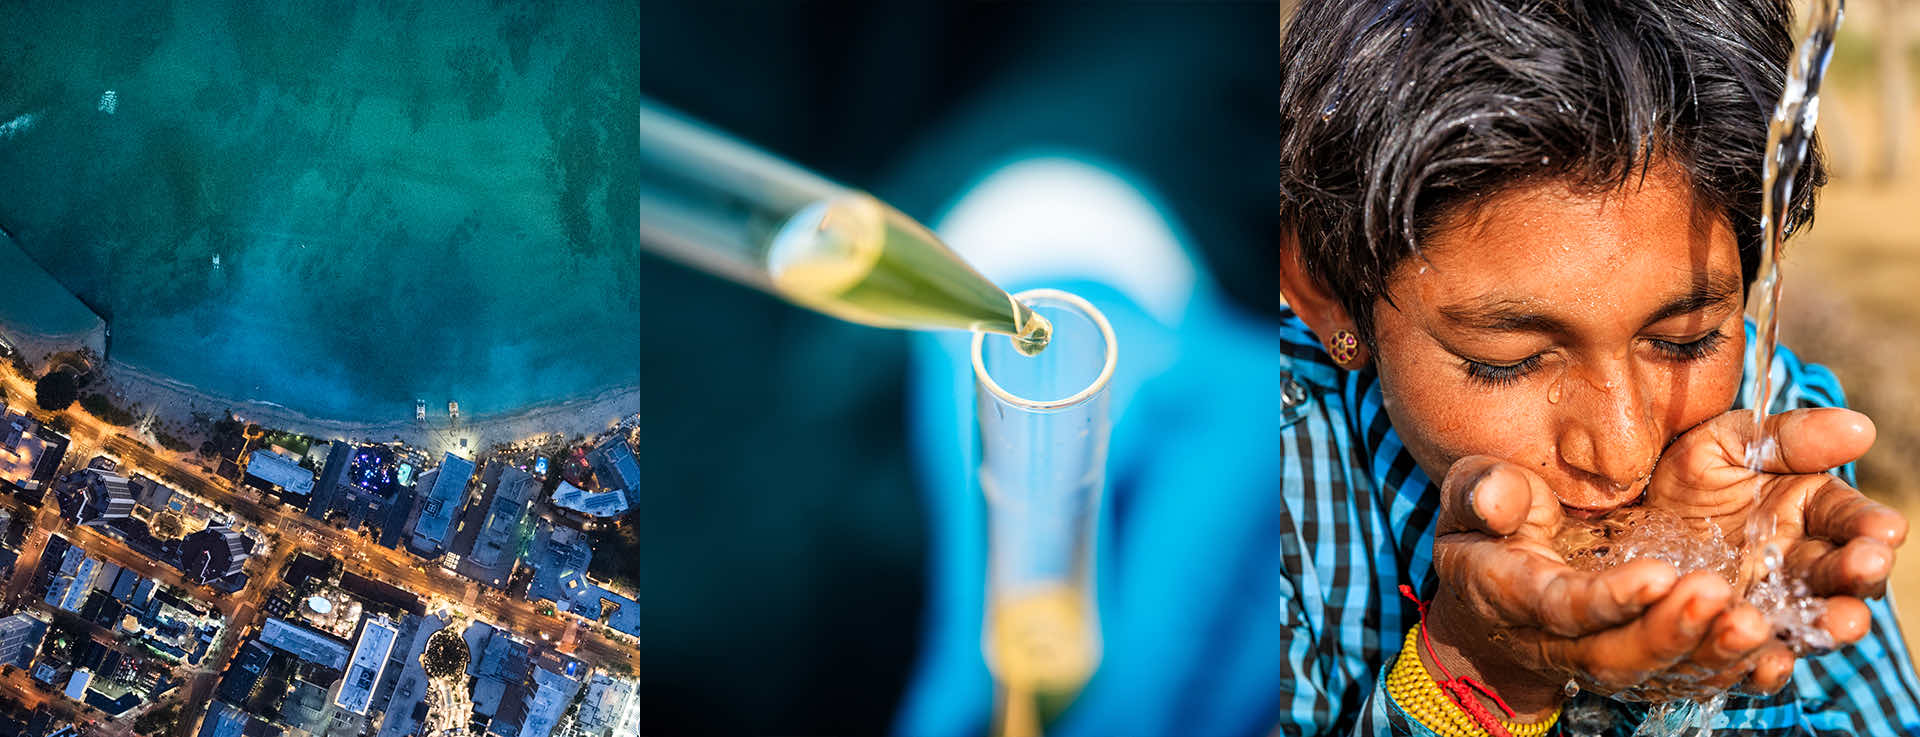 Triptych aerial view of Waikiki, Hawaii, close-up view of a pipette and test tube, child drinking water from cupped hands